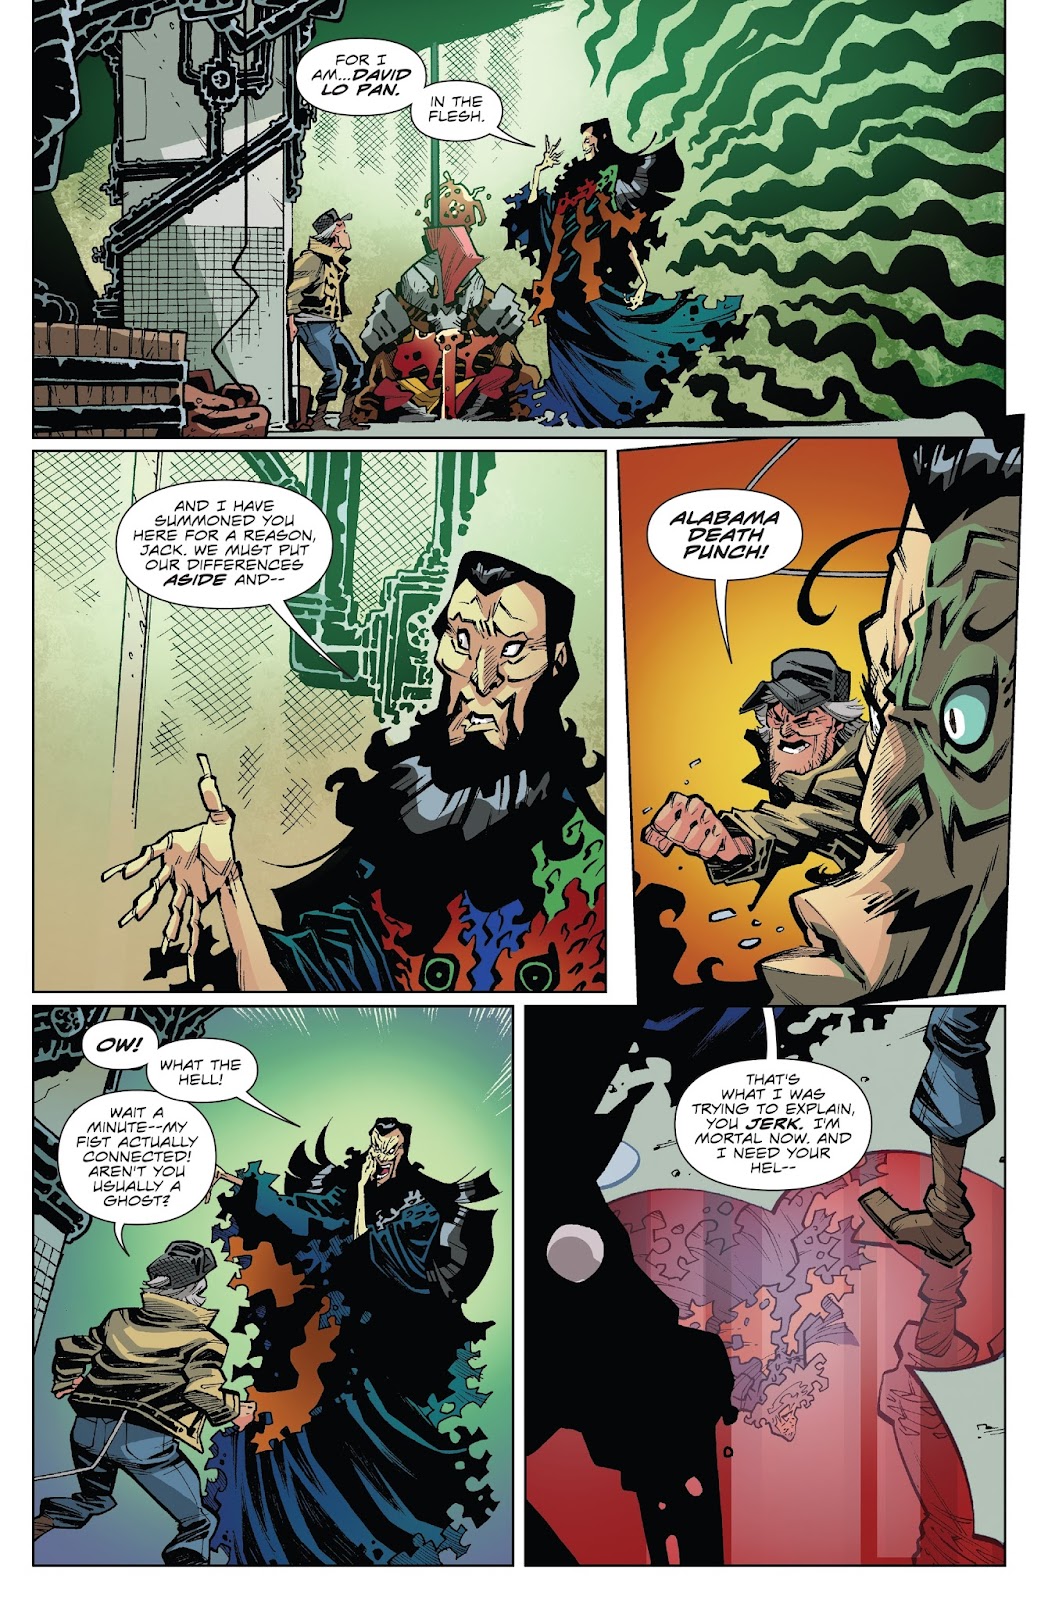 Big Trouble in Little China: Old Man Jack issue 2 - Page 3